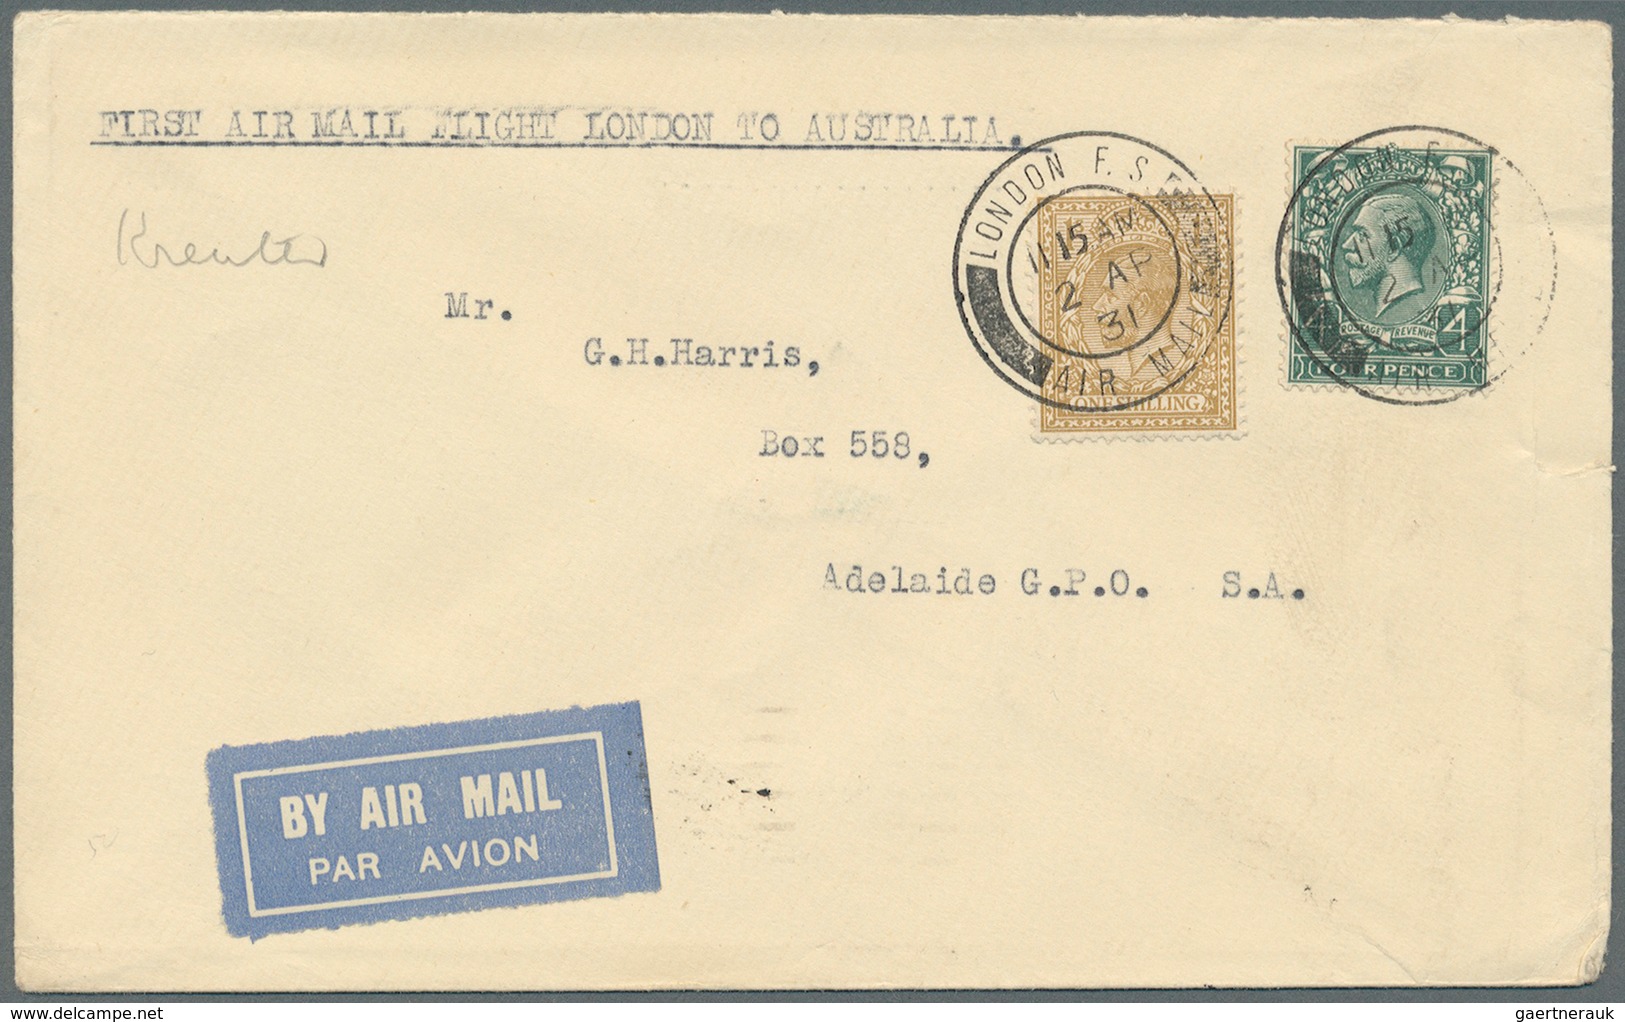 Großbritannien: 1911 from, attractive lot of 49 items "AIRMAIL", first and foremost pre WWII covers